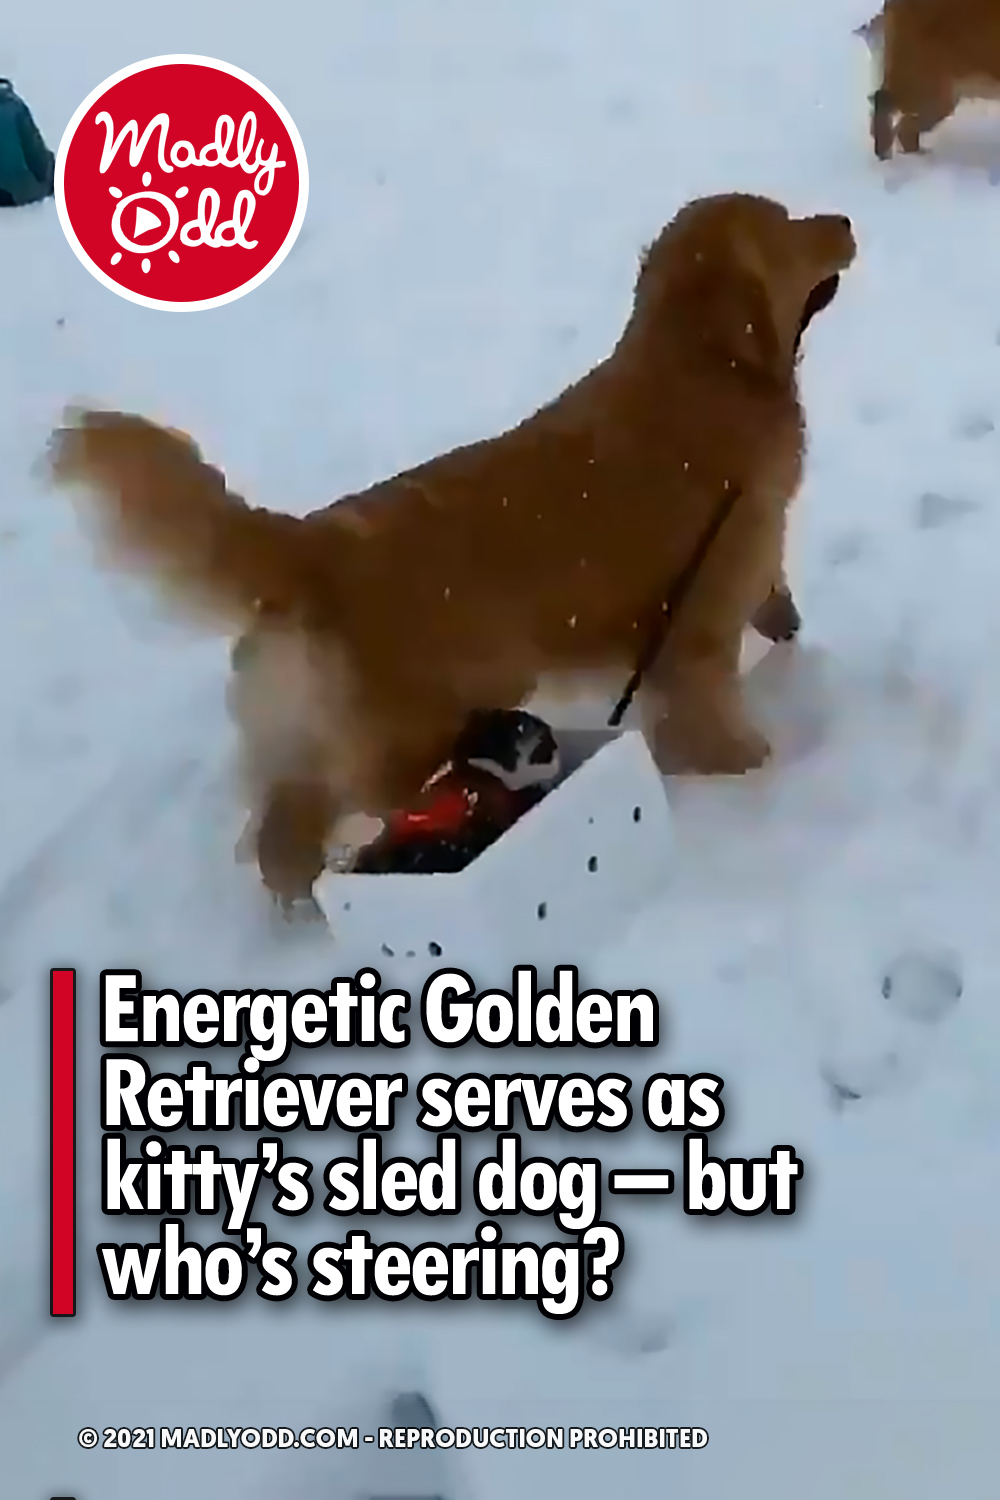 Energetic Golden Retriever serves as kitty’s sled dog – but who’s steering?